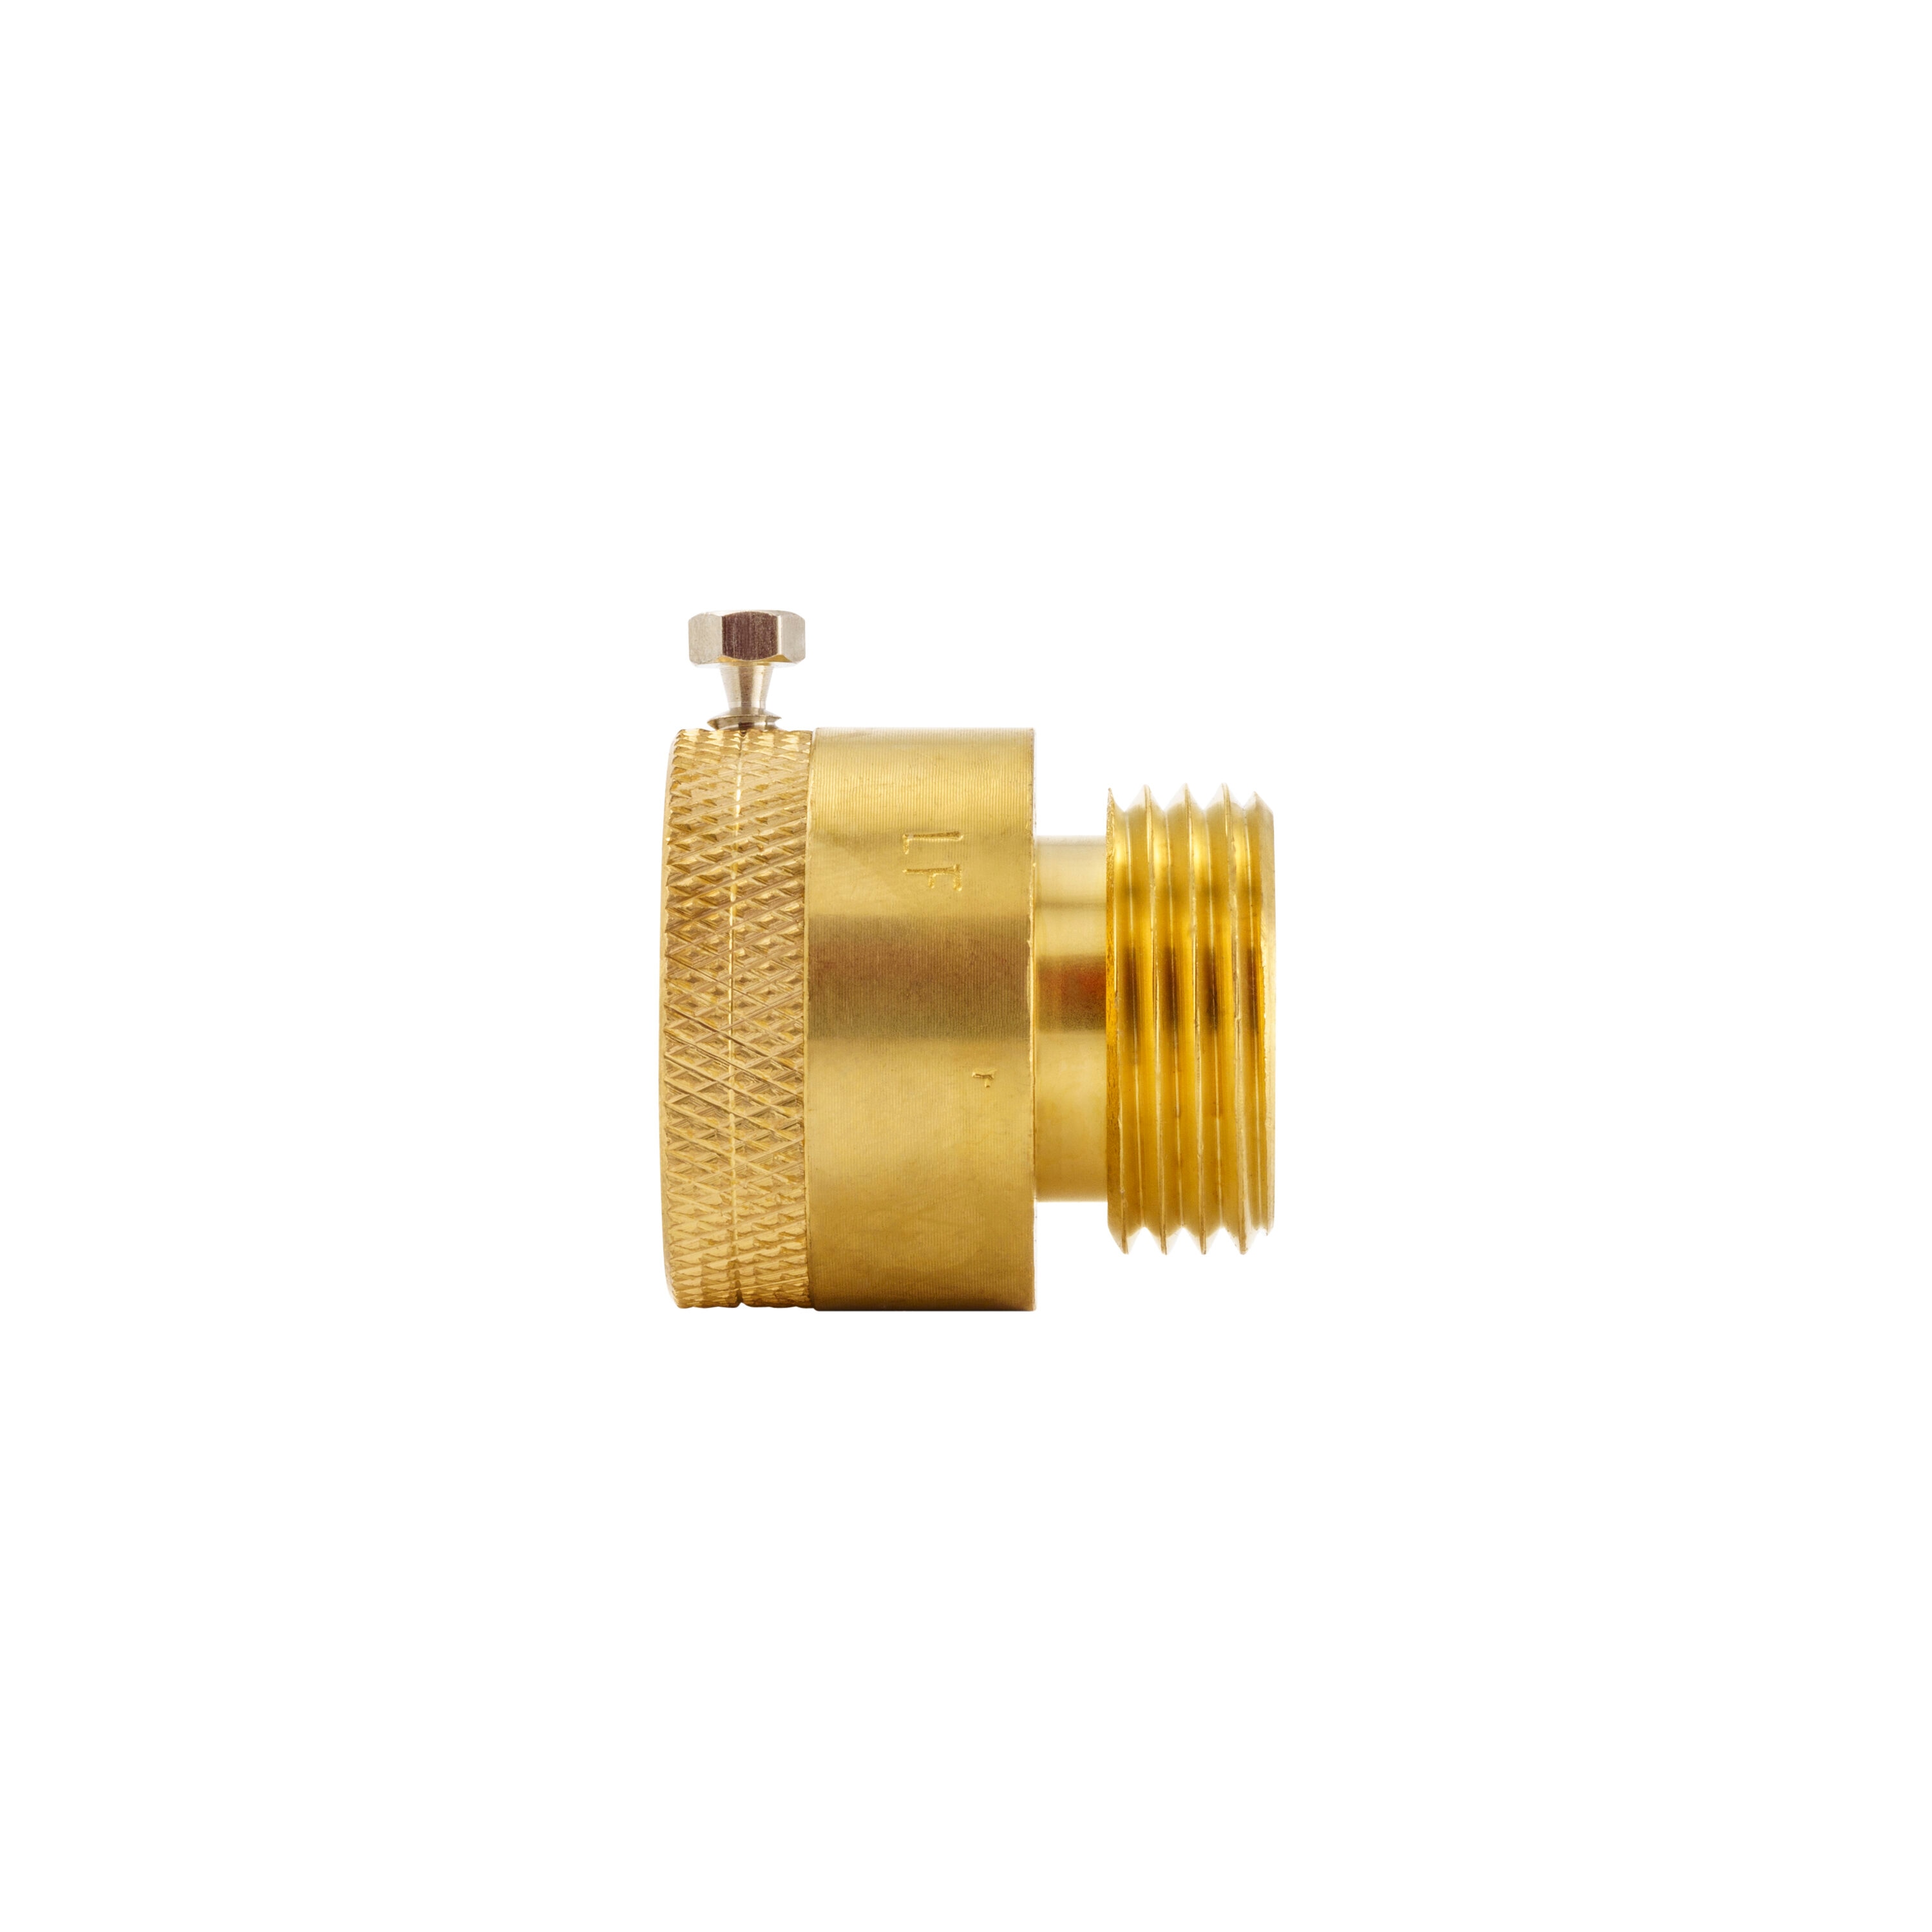 Proline Series 3/4-in x 3/4-in Threaded Female Adapter Fitting in the Brass  Fittings department at